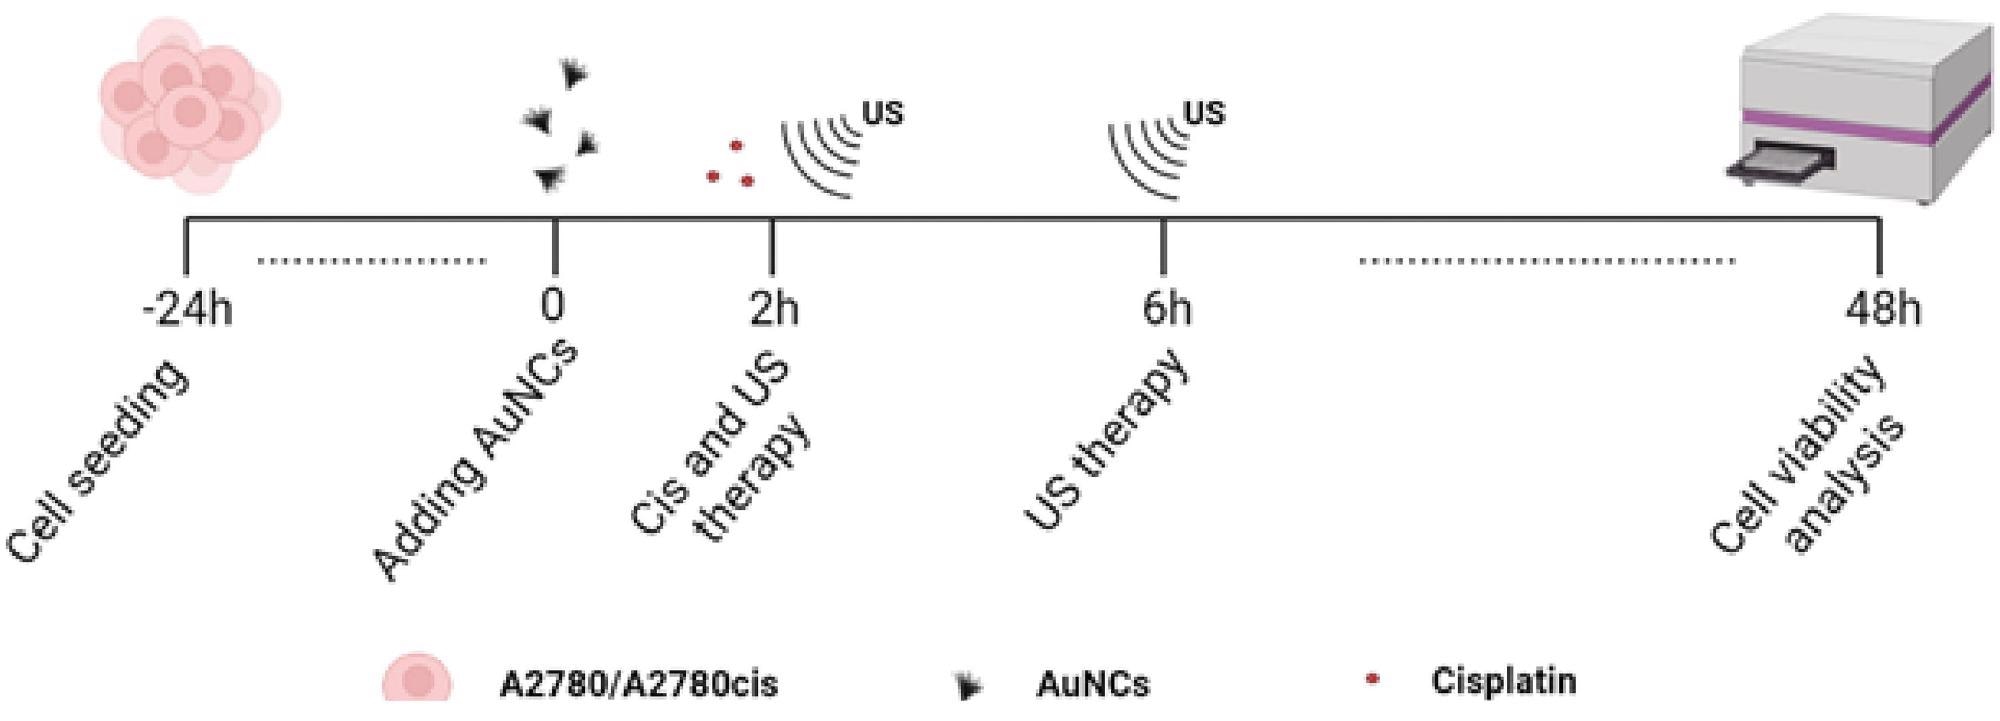 Timeline of study. 40,000 A2780/A2780cis cells were separately seeded in each well. 2 h after the addition of 100 µm/mL AuNCs;4.3 µM Cis and US therapy were applied. After 6 h, US therapy was applied again, and after 48 h of incubation, cell viability analyzes were performed.